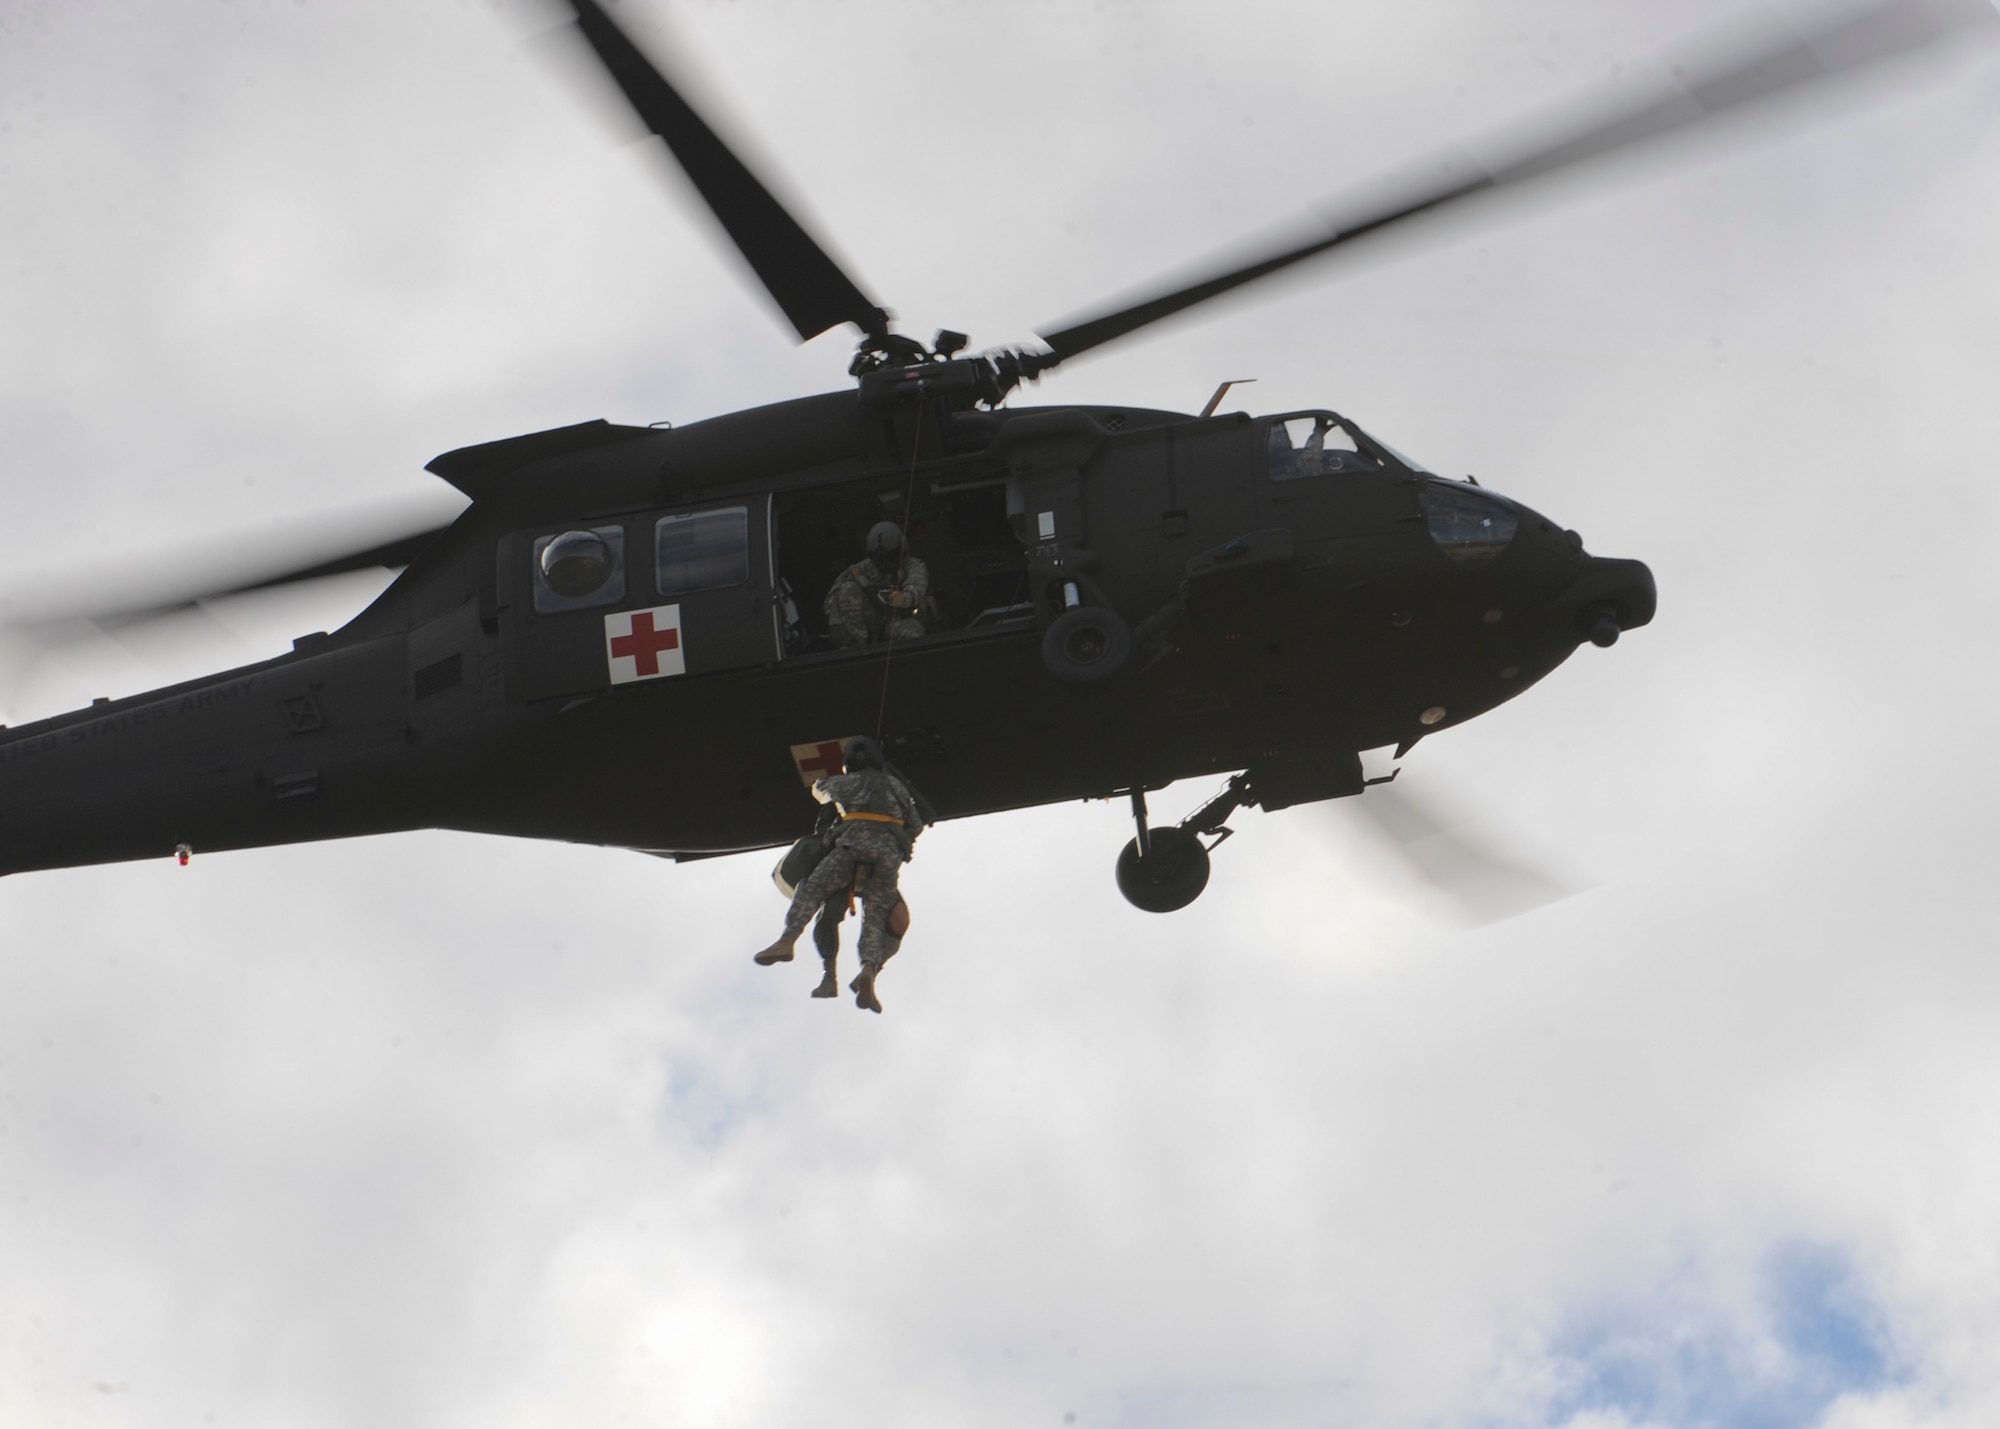 Soldiers from the South Dakota National Guard’s Company C, 1st Battalion, 189th Aviation Regiment, rescue two injured service members during a joint training exercise at the Powder River Training Complex, Belle Fourche, S.D., Nov. 16, 2016. The training exercise was designed to train aircrew under realistic scenarios against modern threats and included fighter, tanker and bomber aircraft from across the U.S. armed forces. (U.S. Air Force photo by Senior Airman Anania Tekurio/Released)